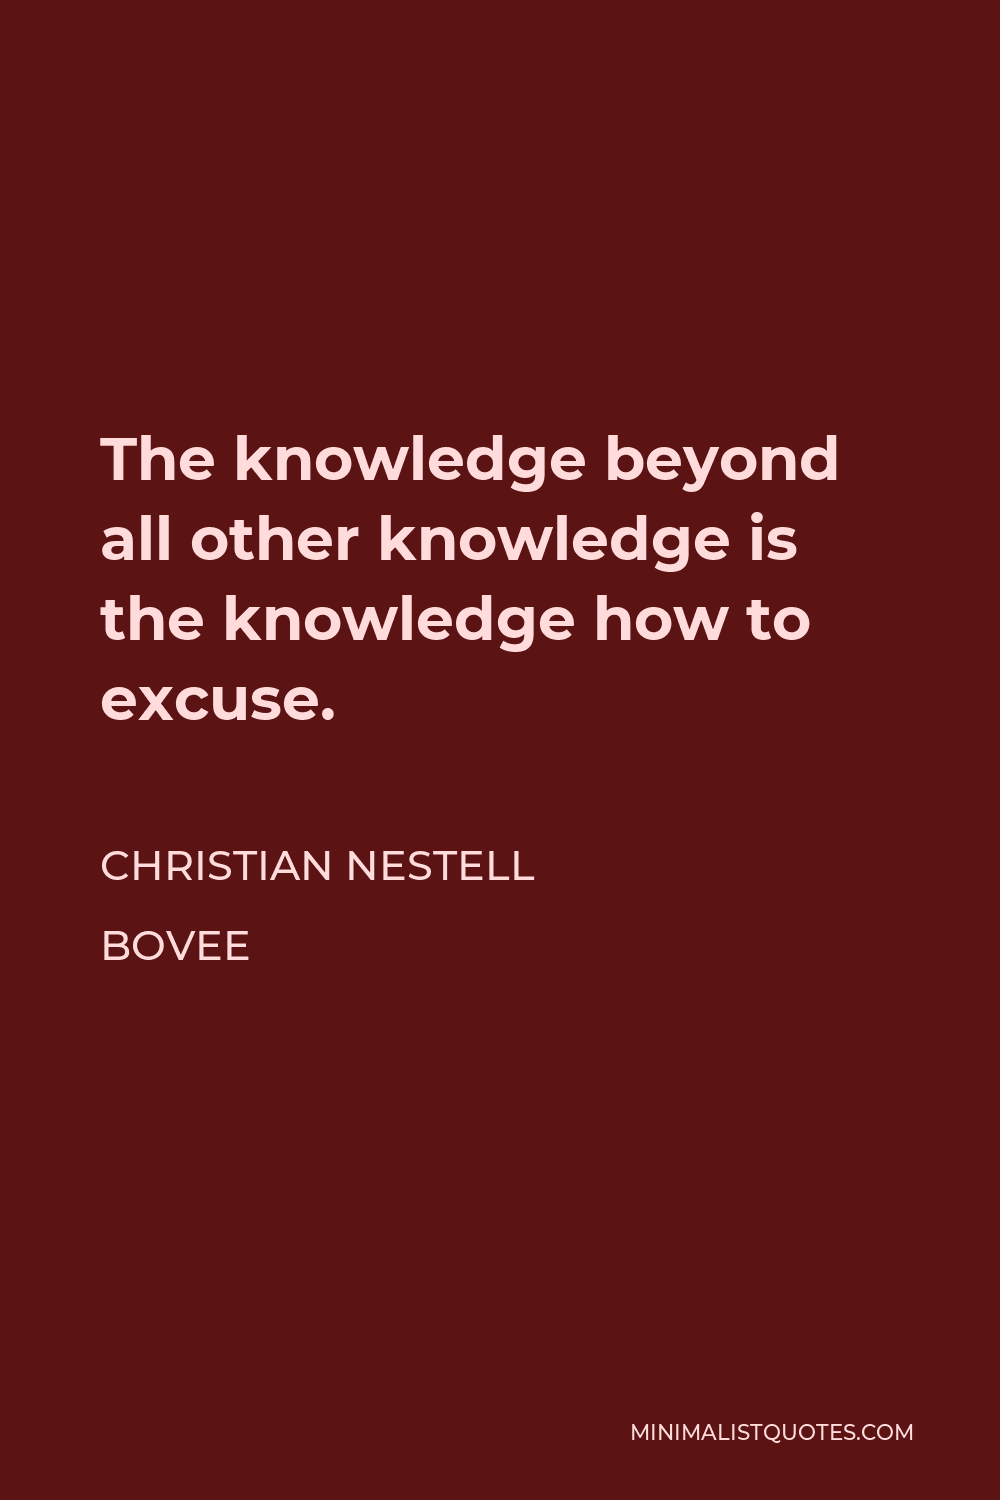 Christian Nestell Bovee Quote - The knowledge beyond all other knowledge is the knowledge how to excuse.